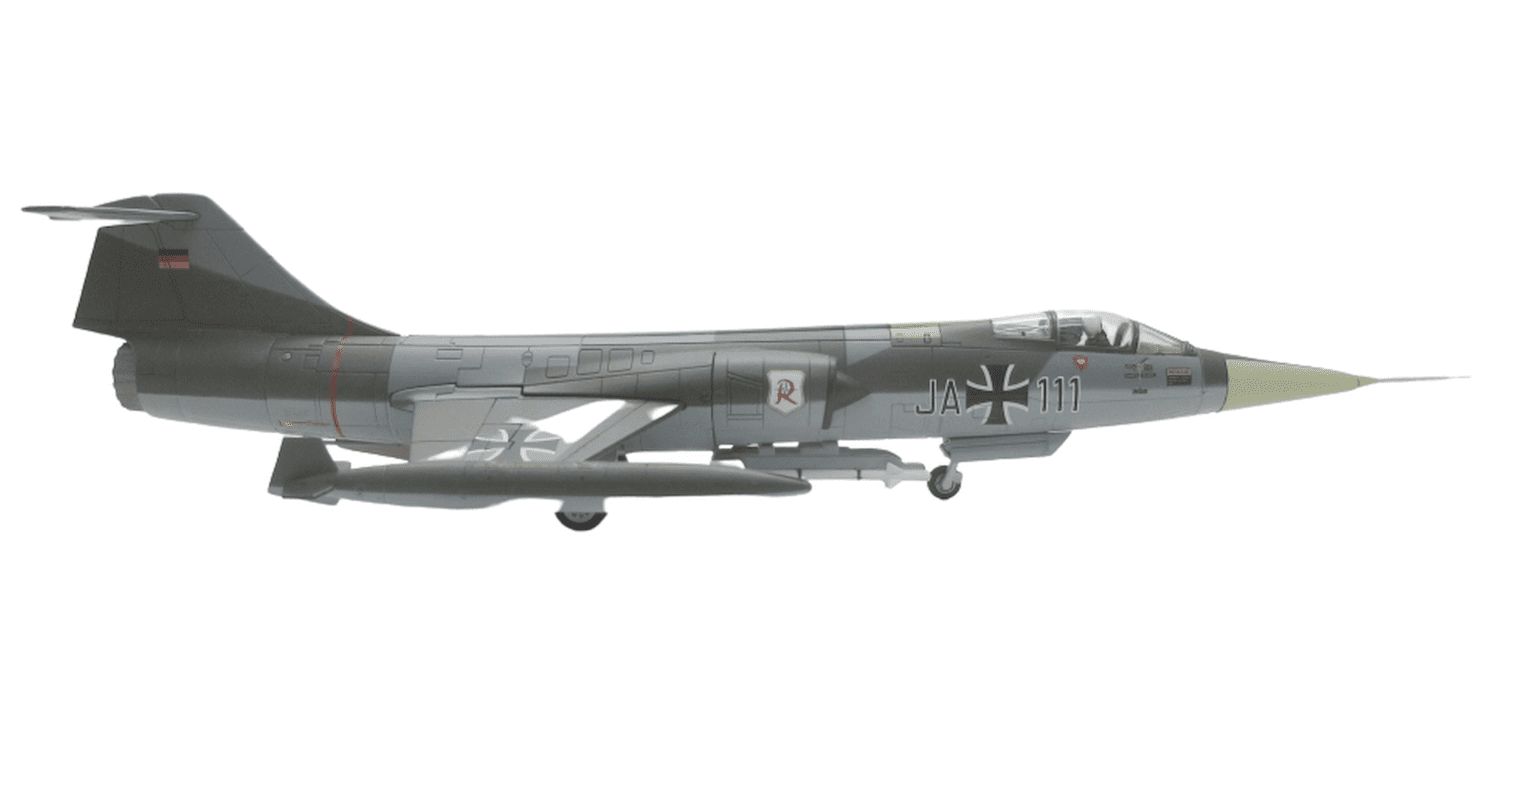 Starboard side view of the Lockheed F-104G Starfighter 1/72 scale diecast model of 